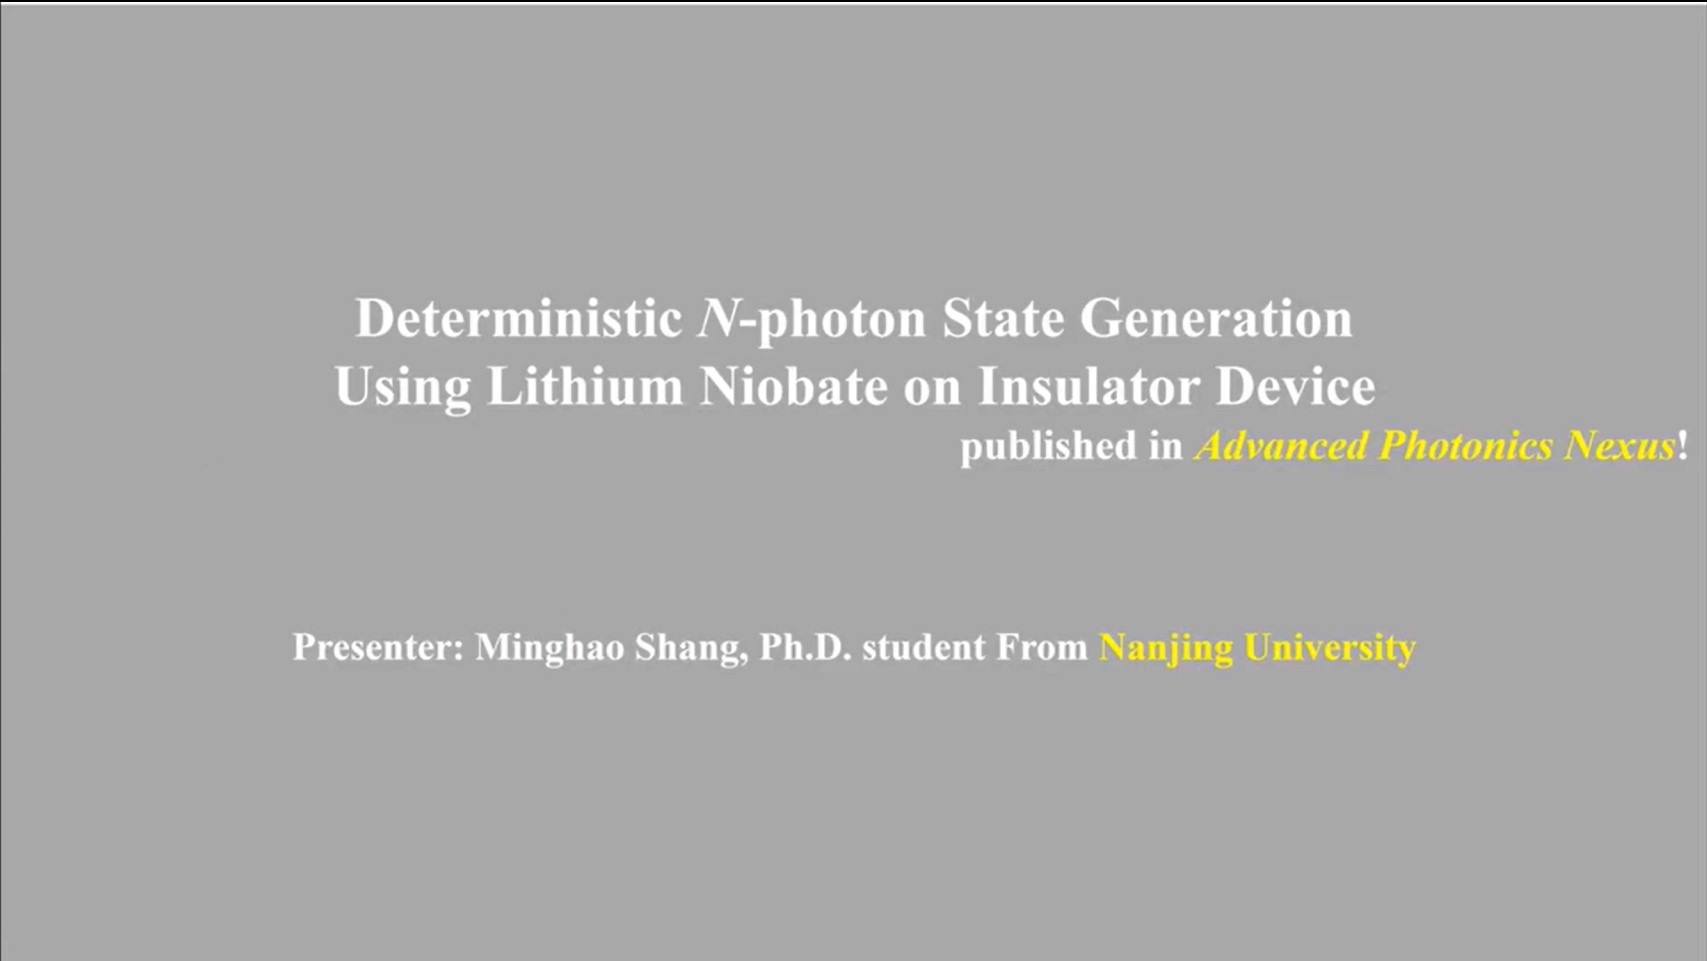 Author Minghao Shang provides a brief video explaining the research.